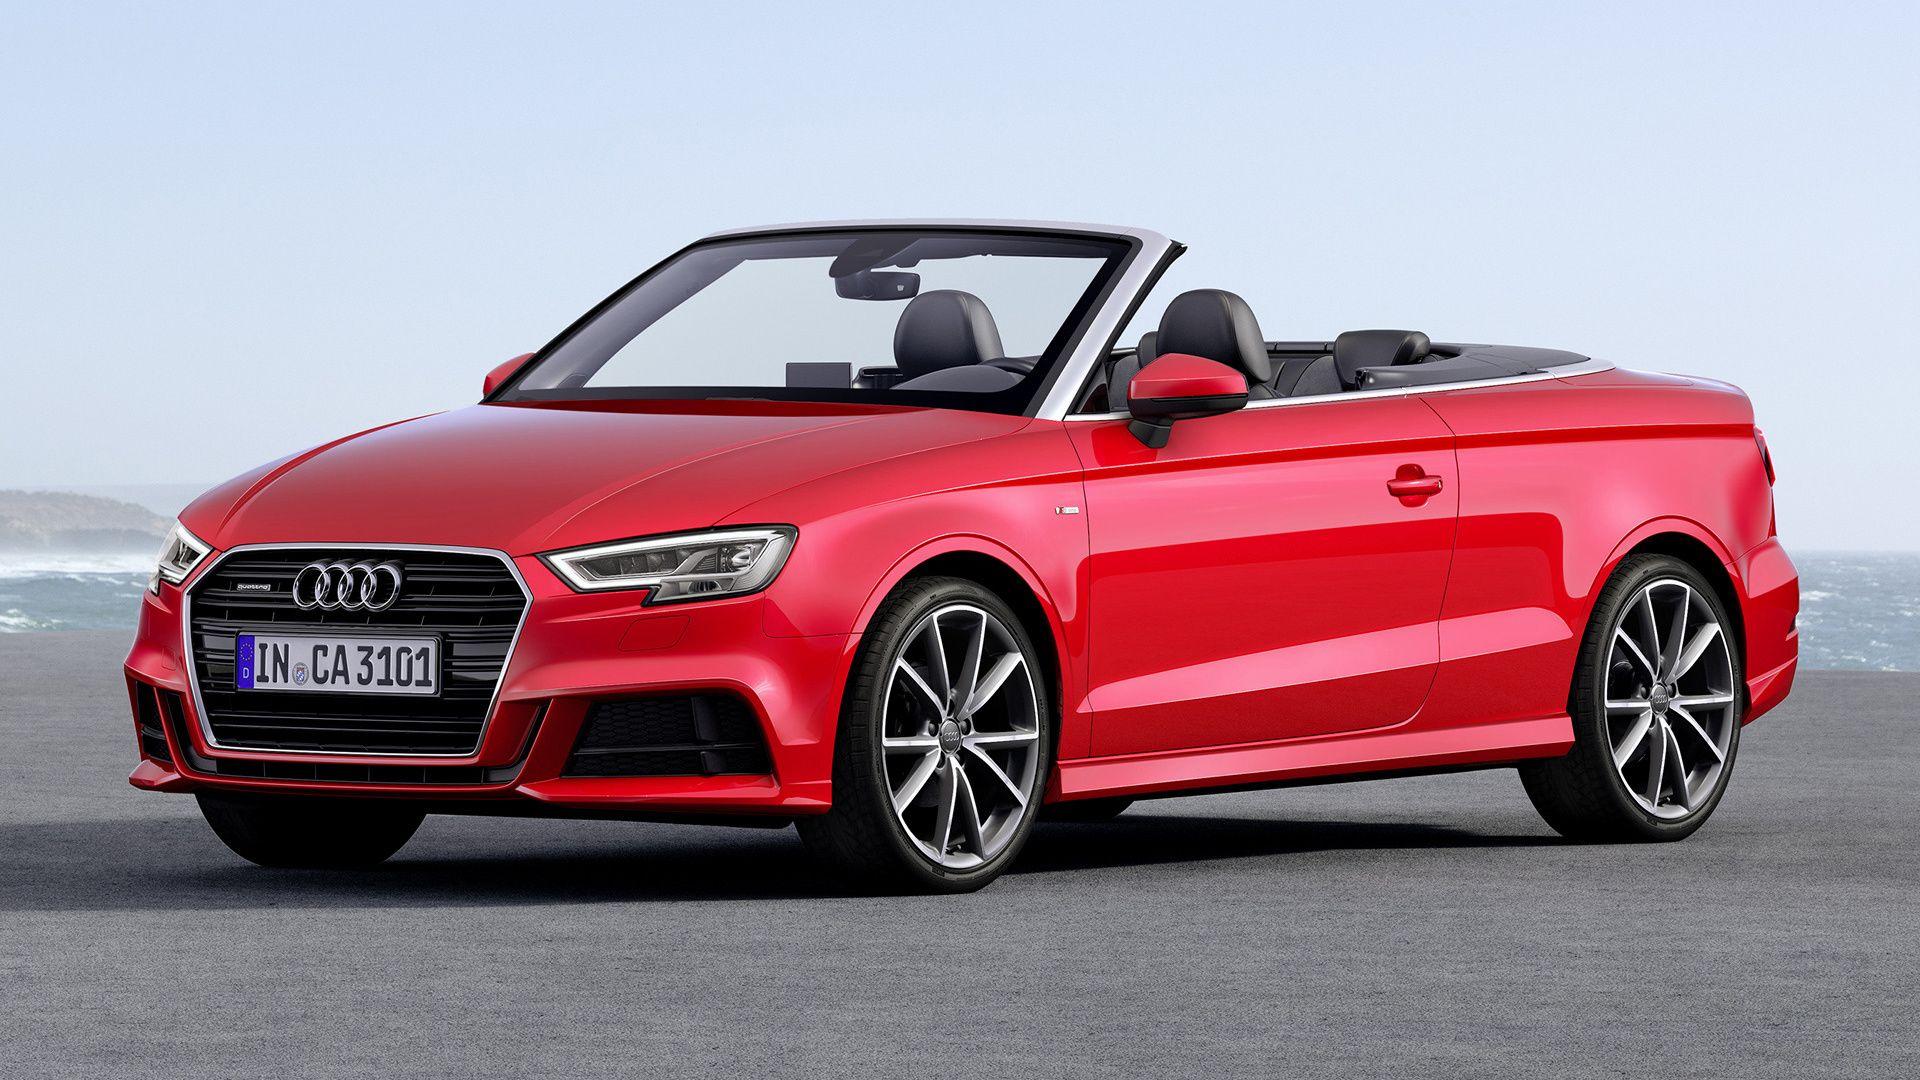 Audi A3 Cabriolet S line and HD Image